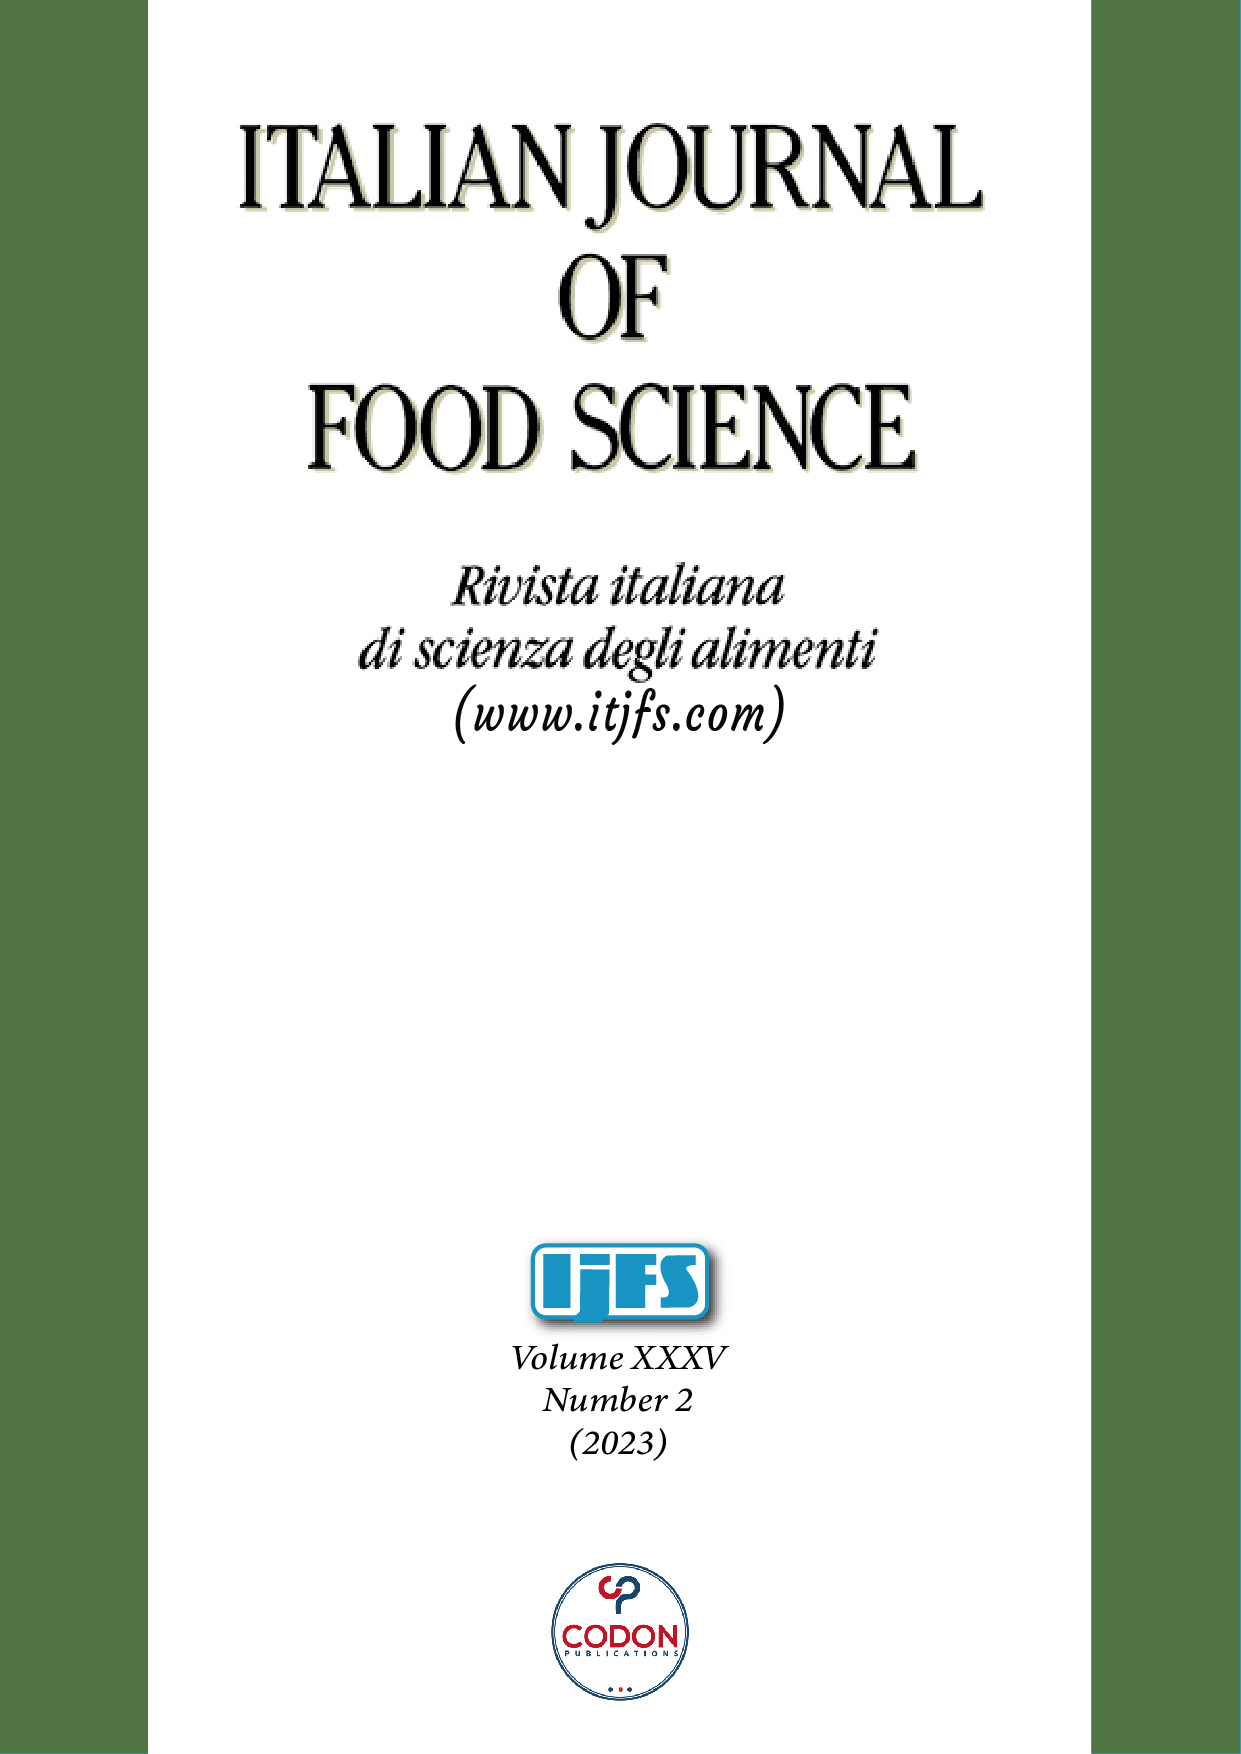 					View Vol. 35 No. 2 (2023): ITALIAN JOURNAL OF FOOD SCIENCE
				